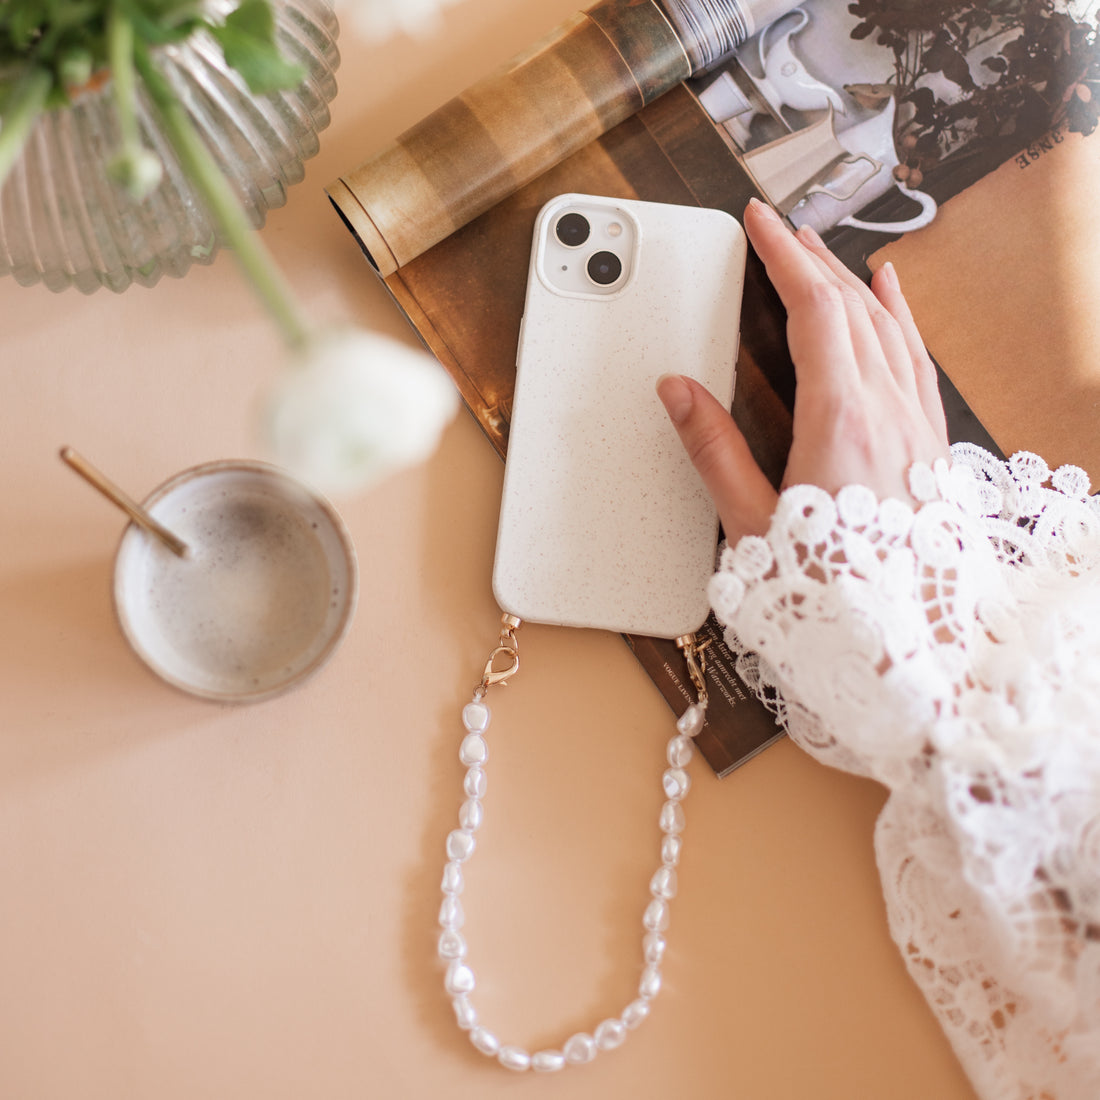 Biodegradable phone case with pearl cord